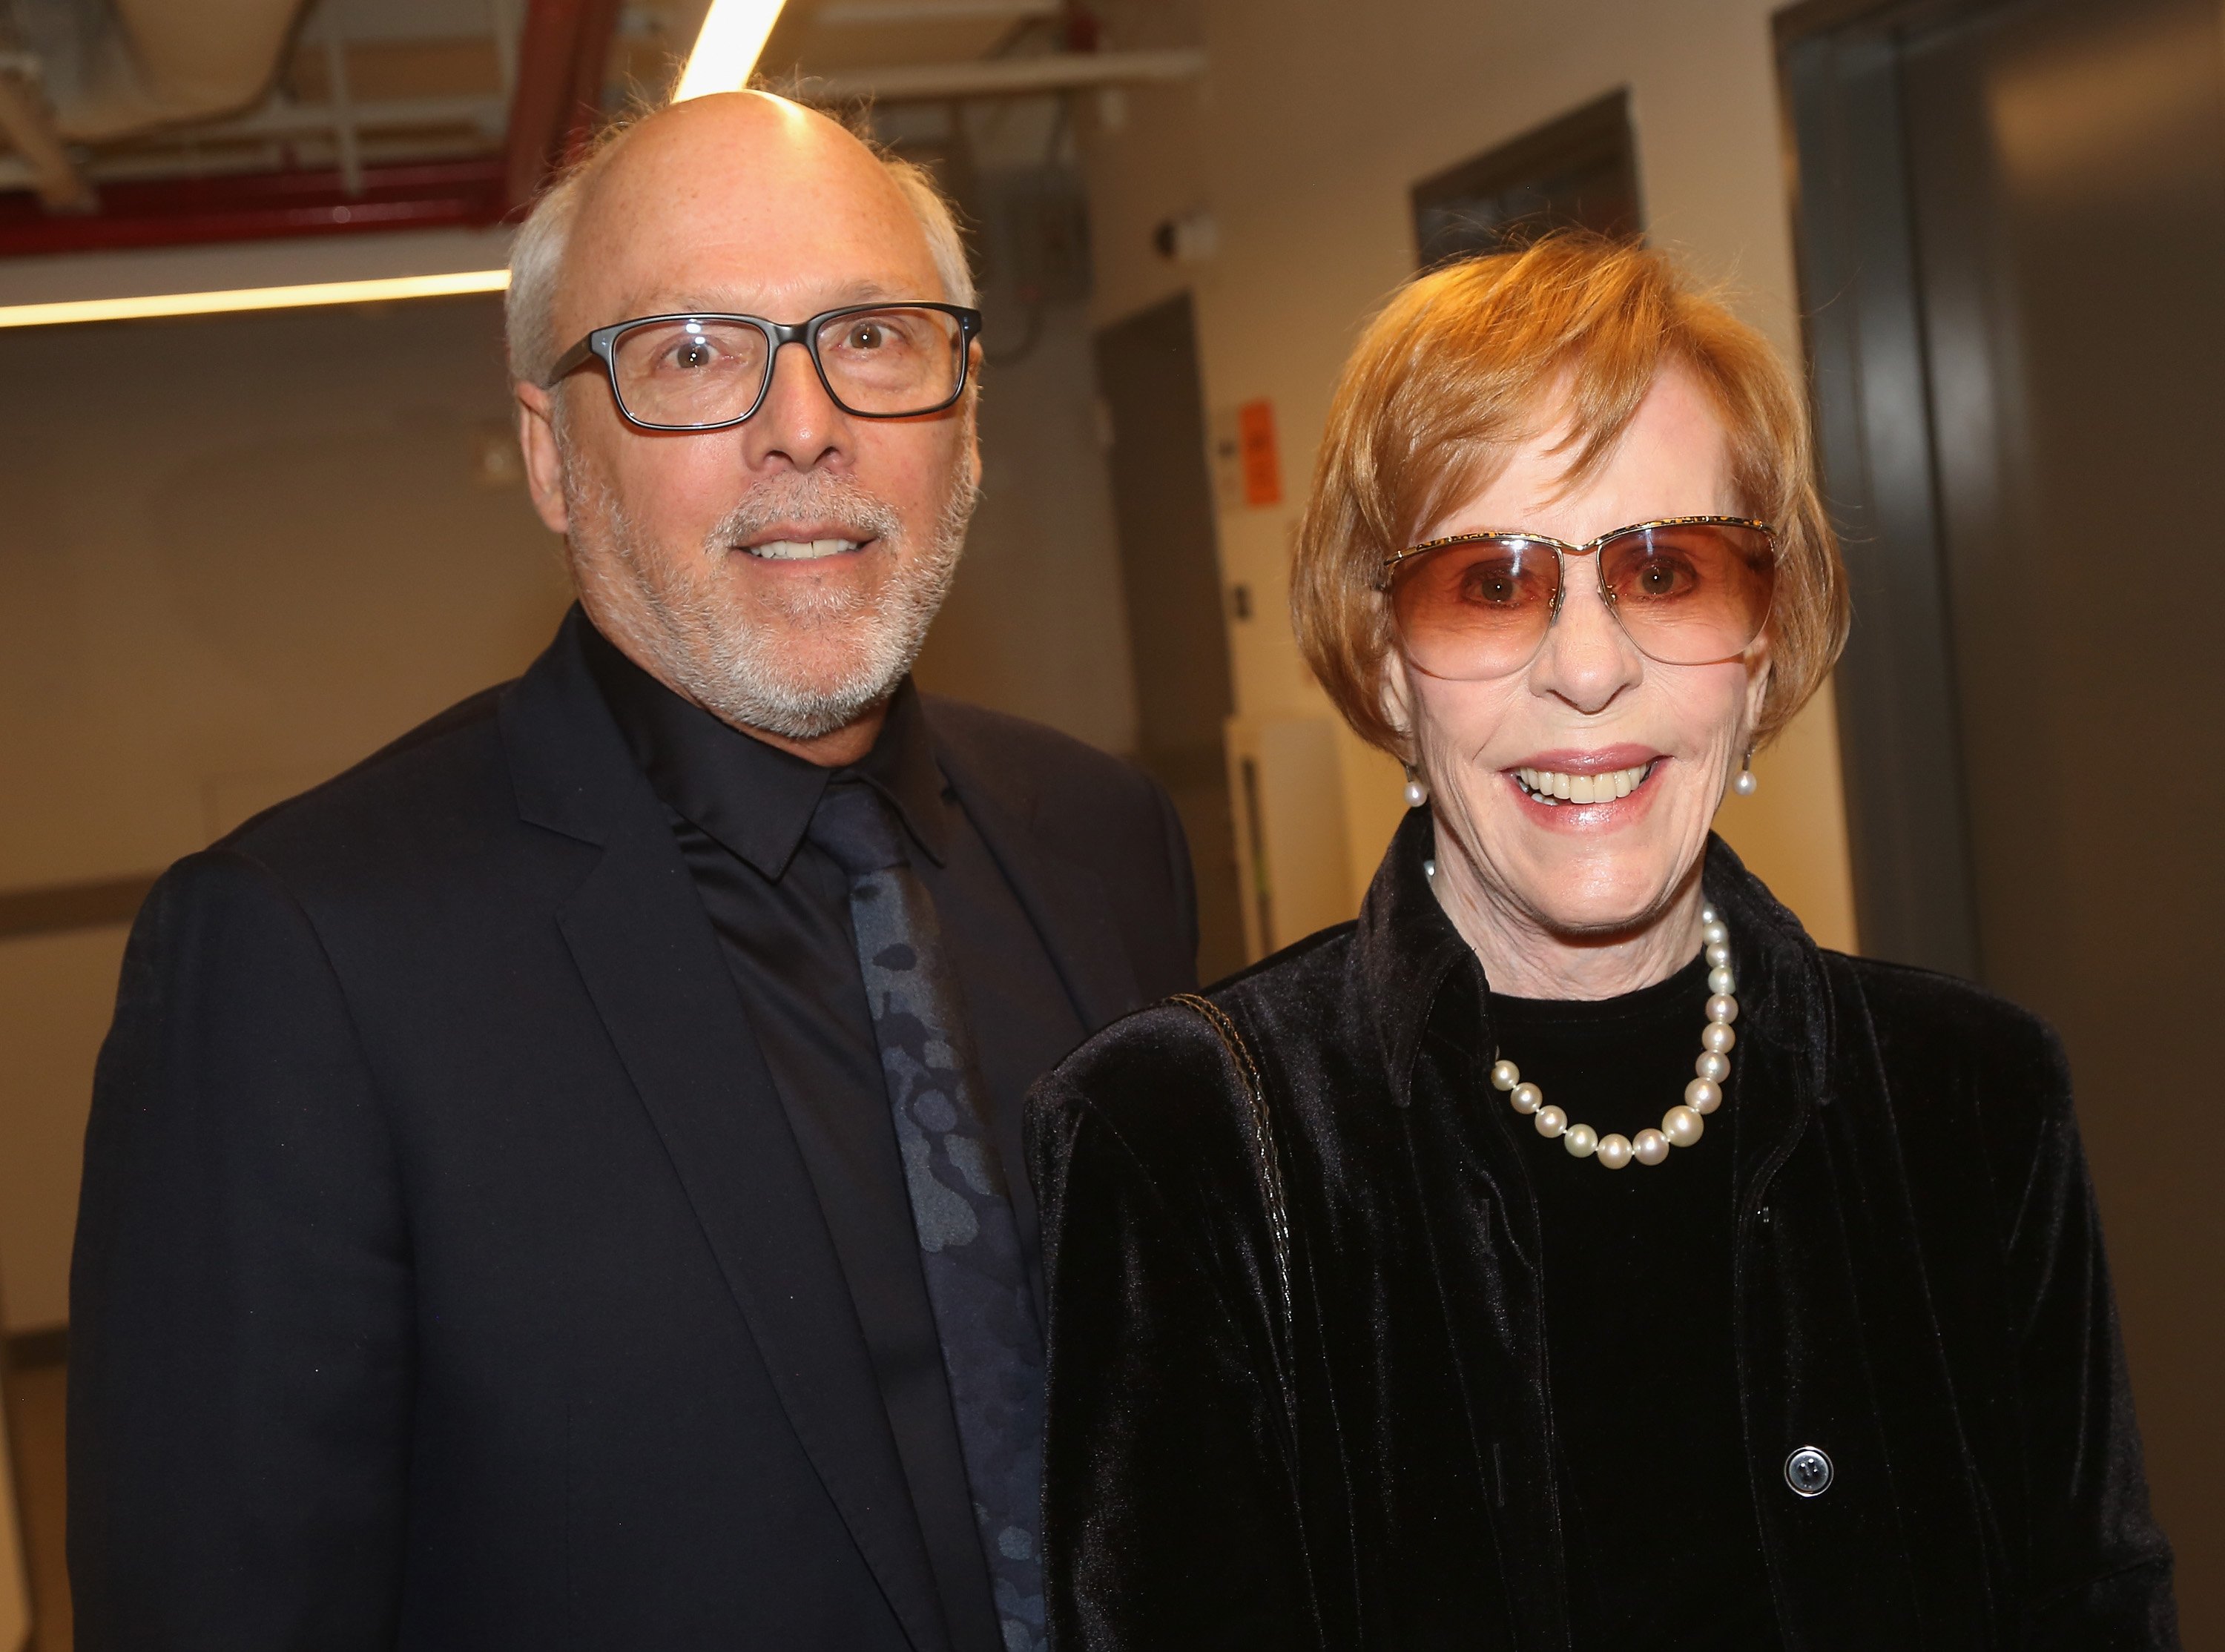 Carol Burnett and her husband, Brian Miller, pose together during night out on Broadway